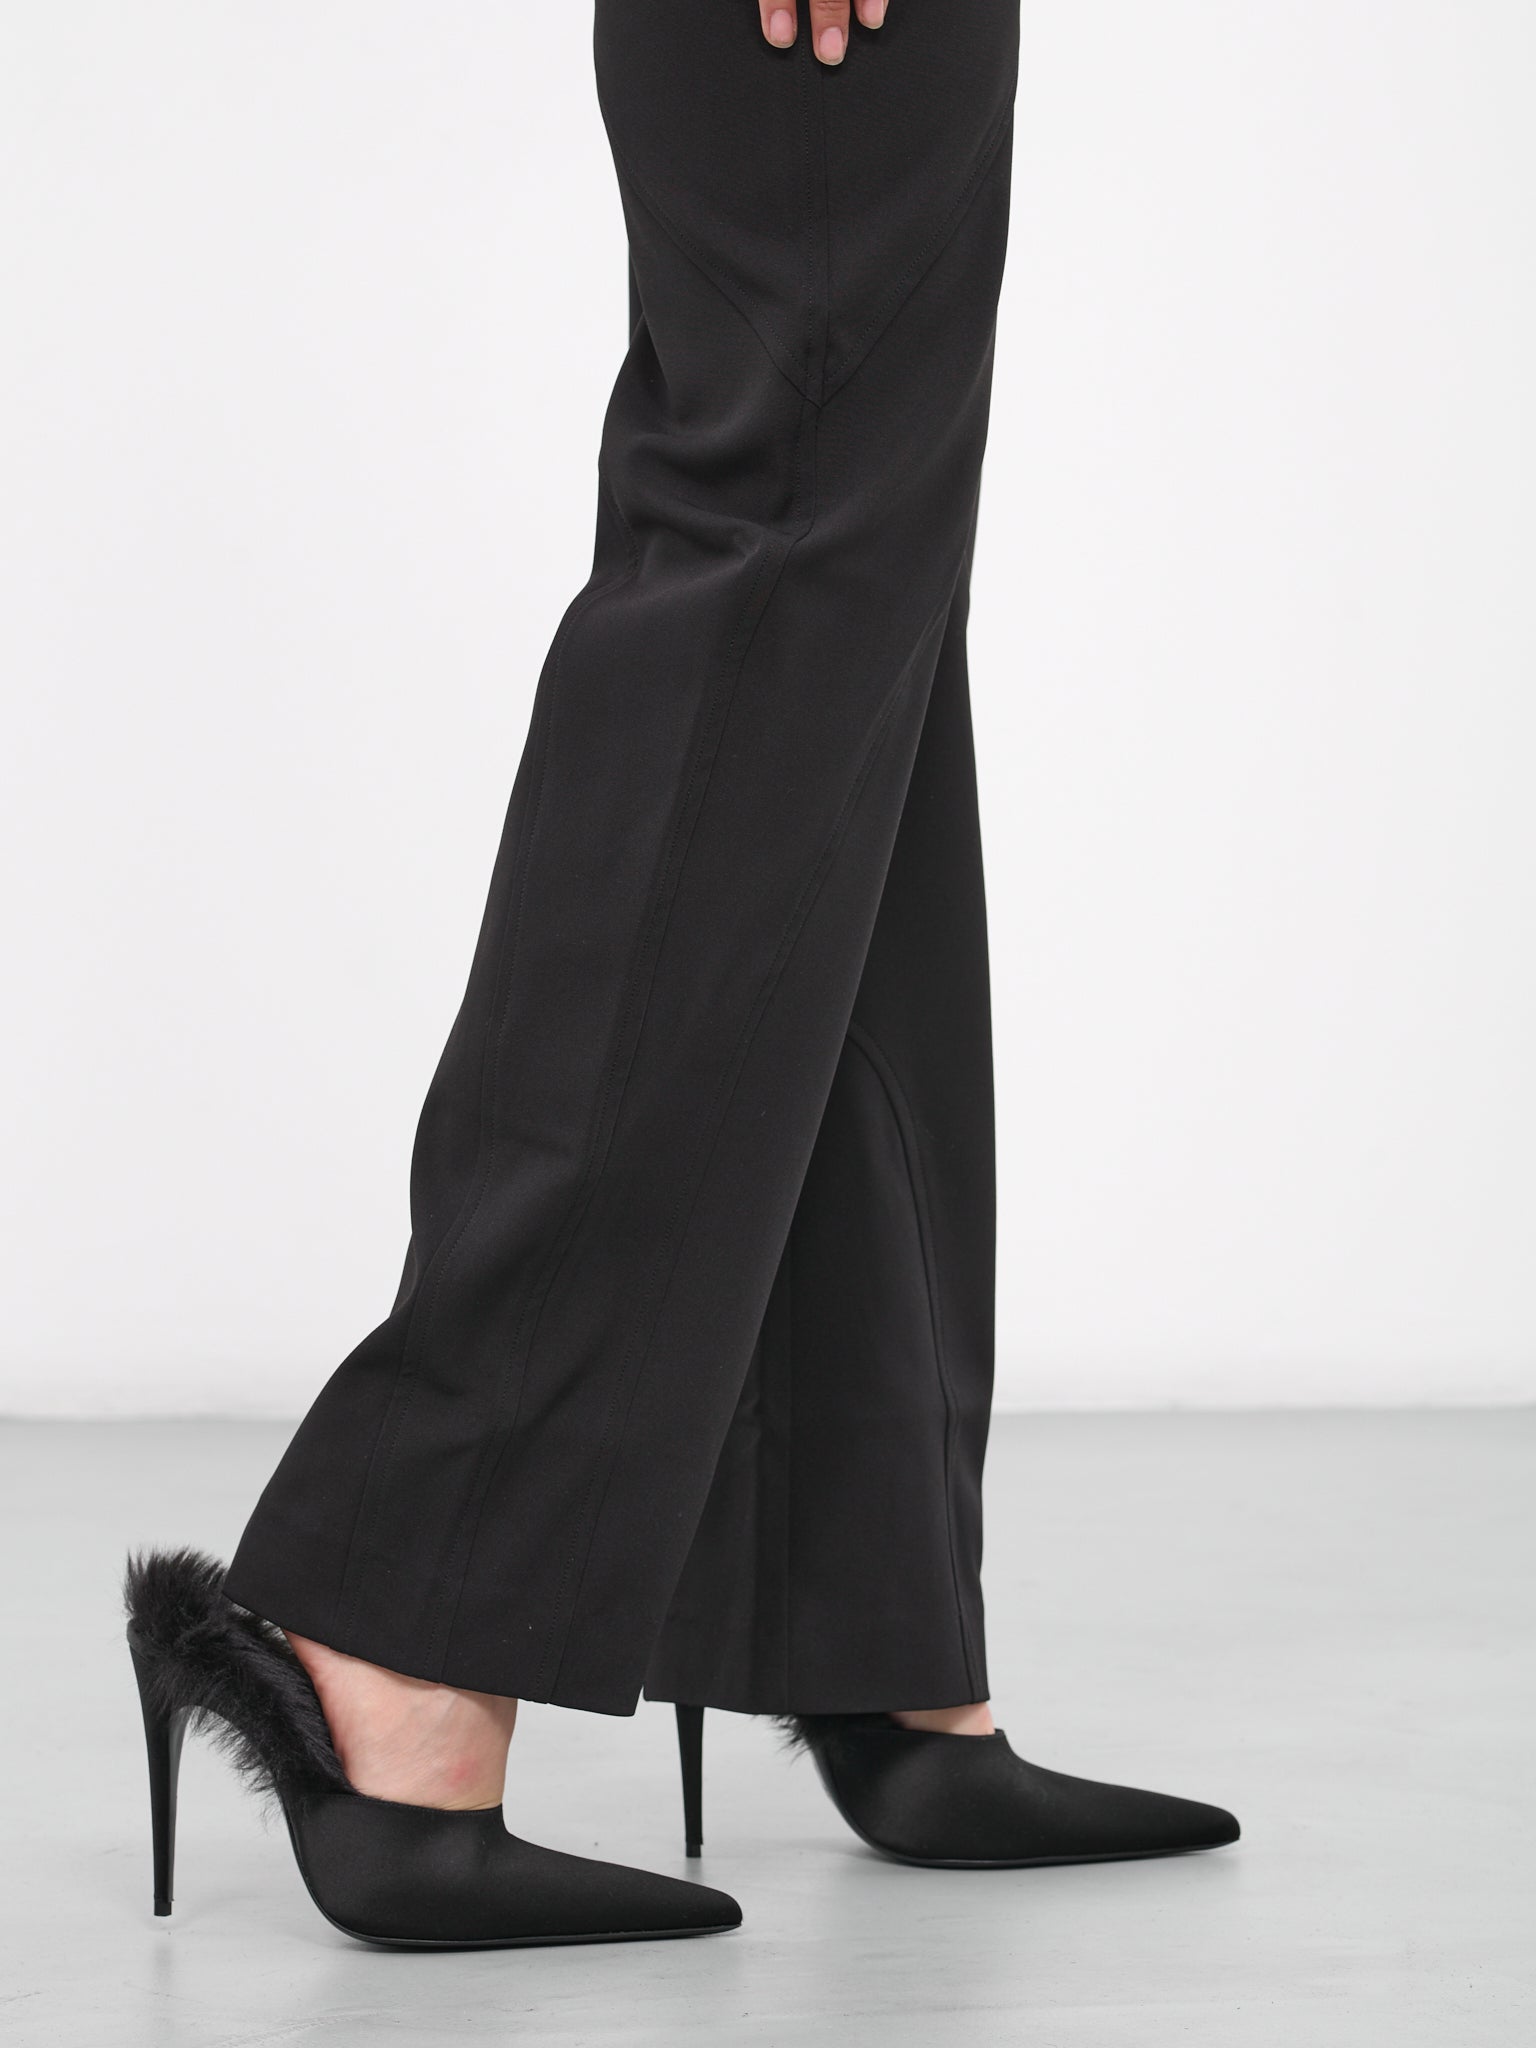 High-waisted Tailored Trousers (P005-BLACK)